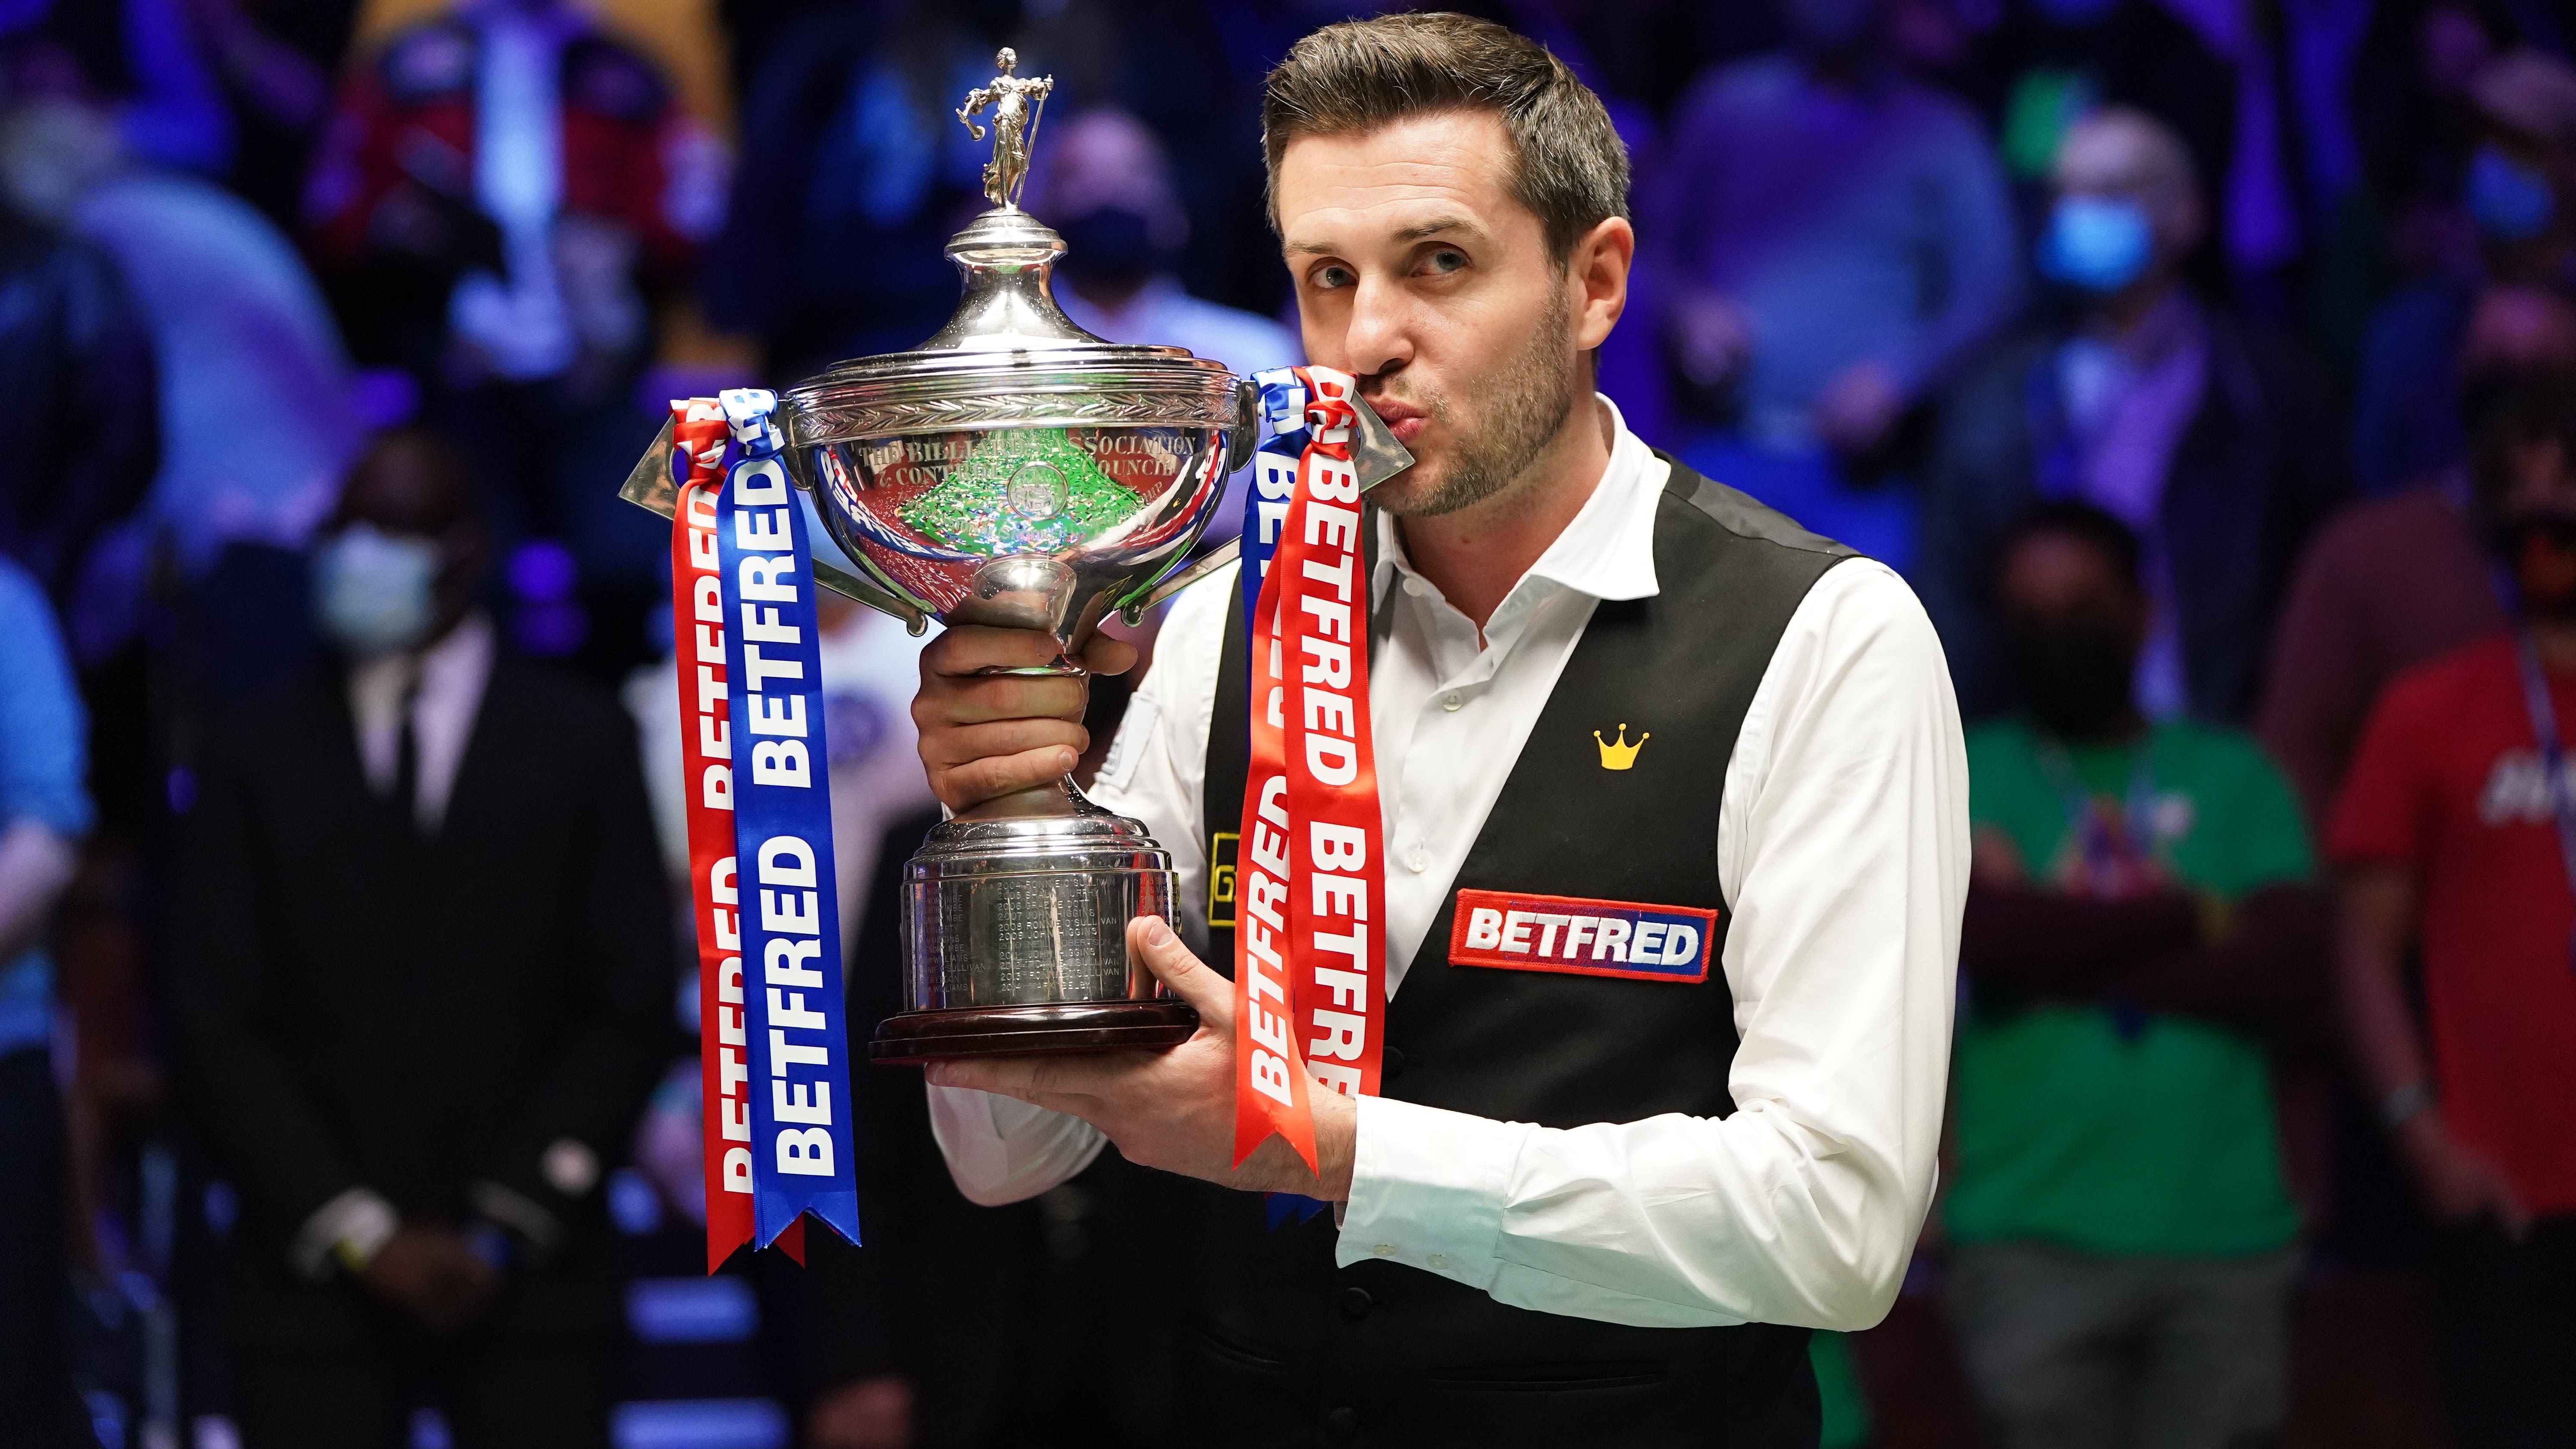 On This Day in 2021: Mark Selby wins another World Championship title